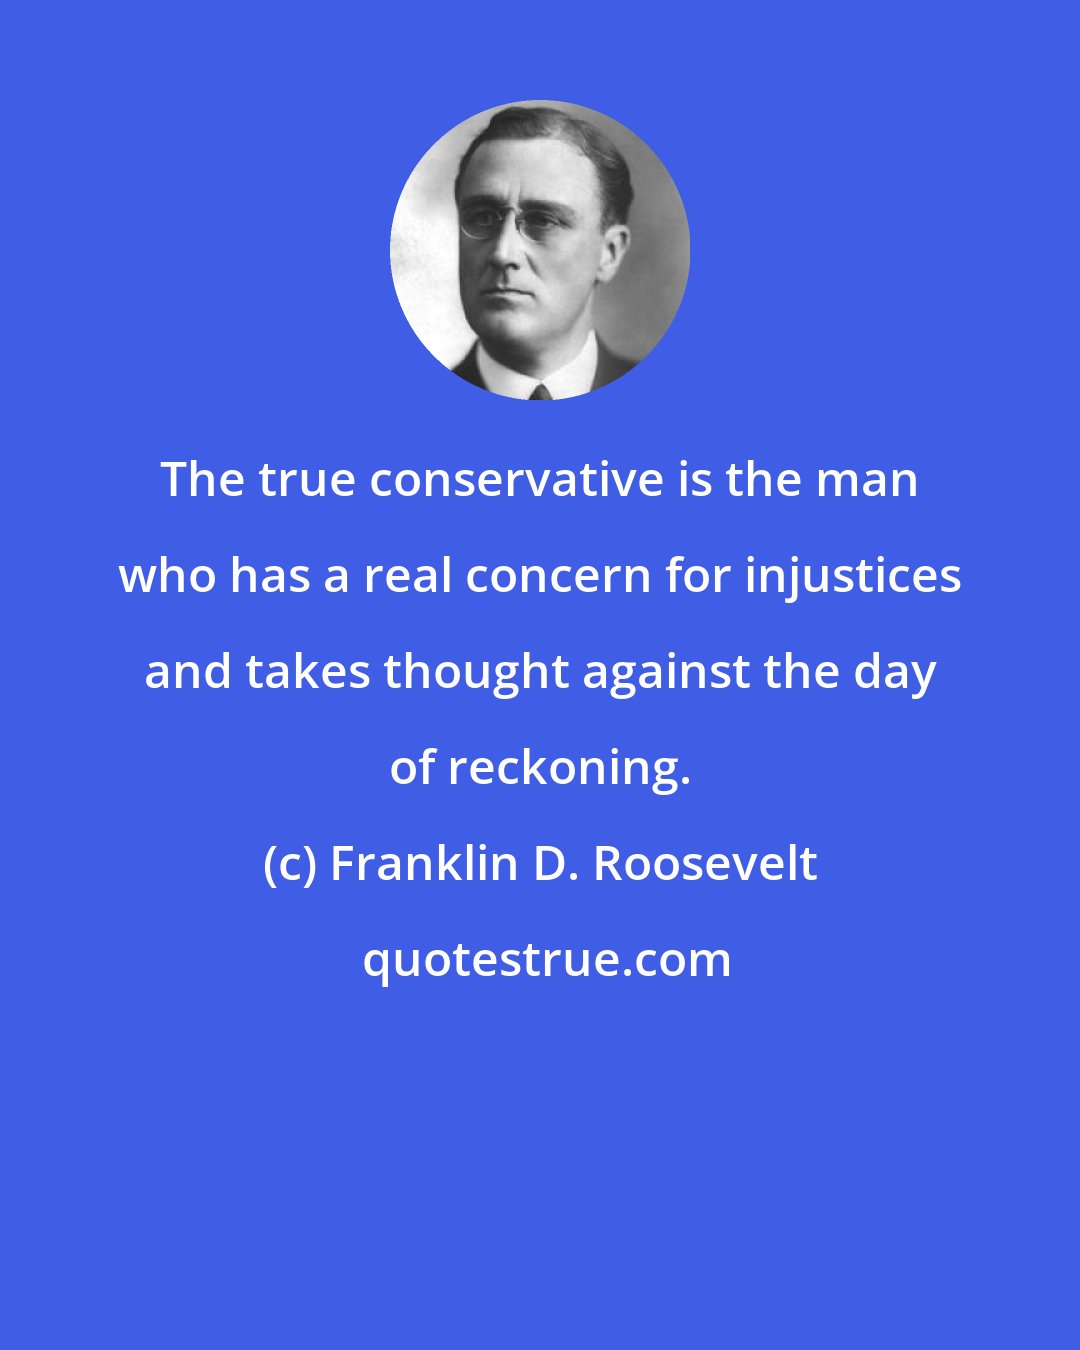 Franklin D. Roosevelt: The true conservative is the man who has a real concern for injustices and takes thought against the day of reckoning.